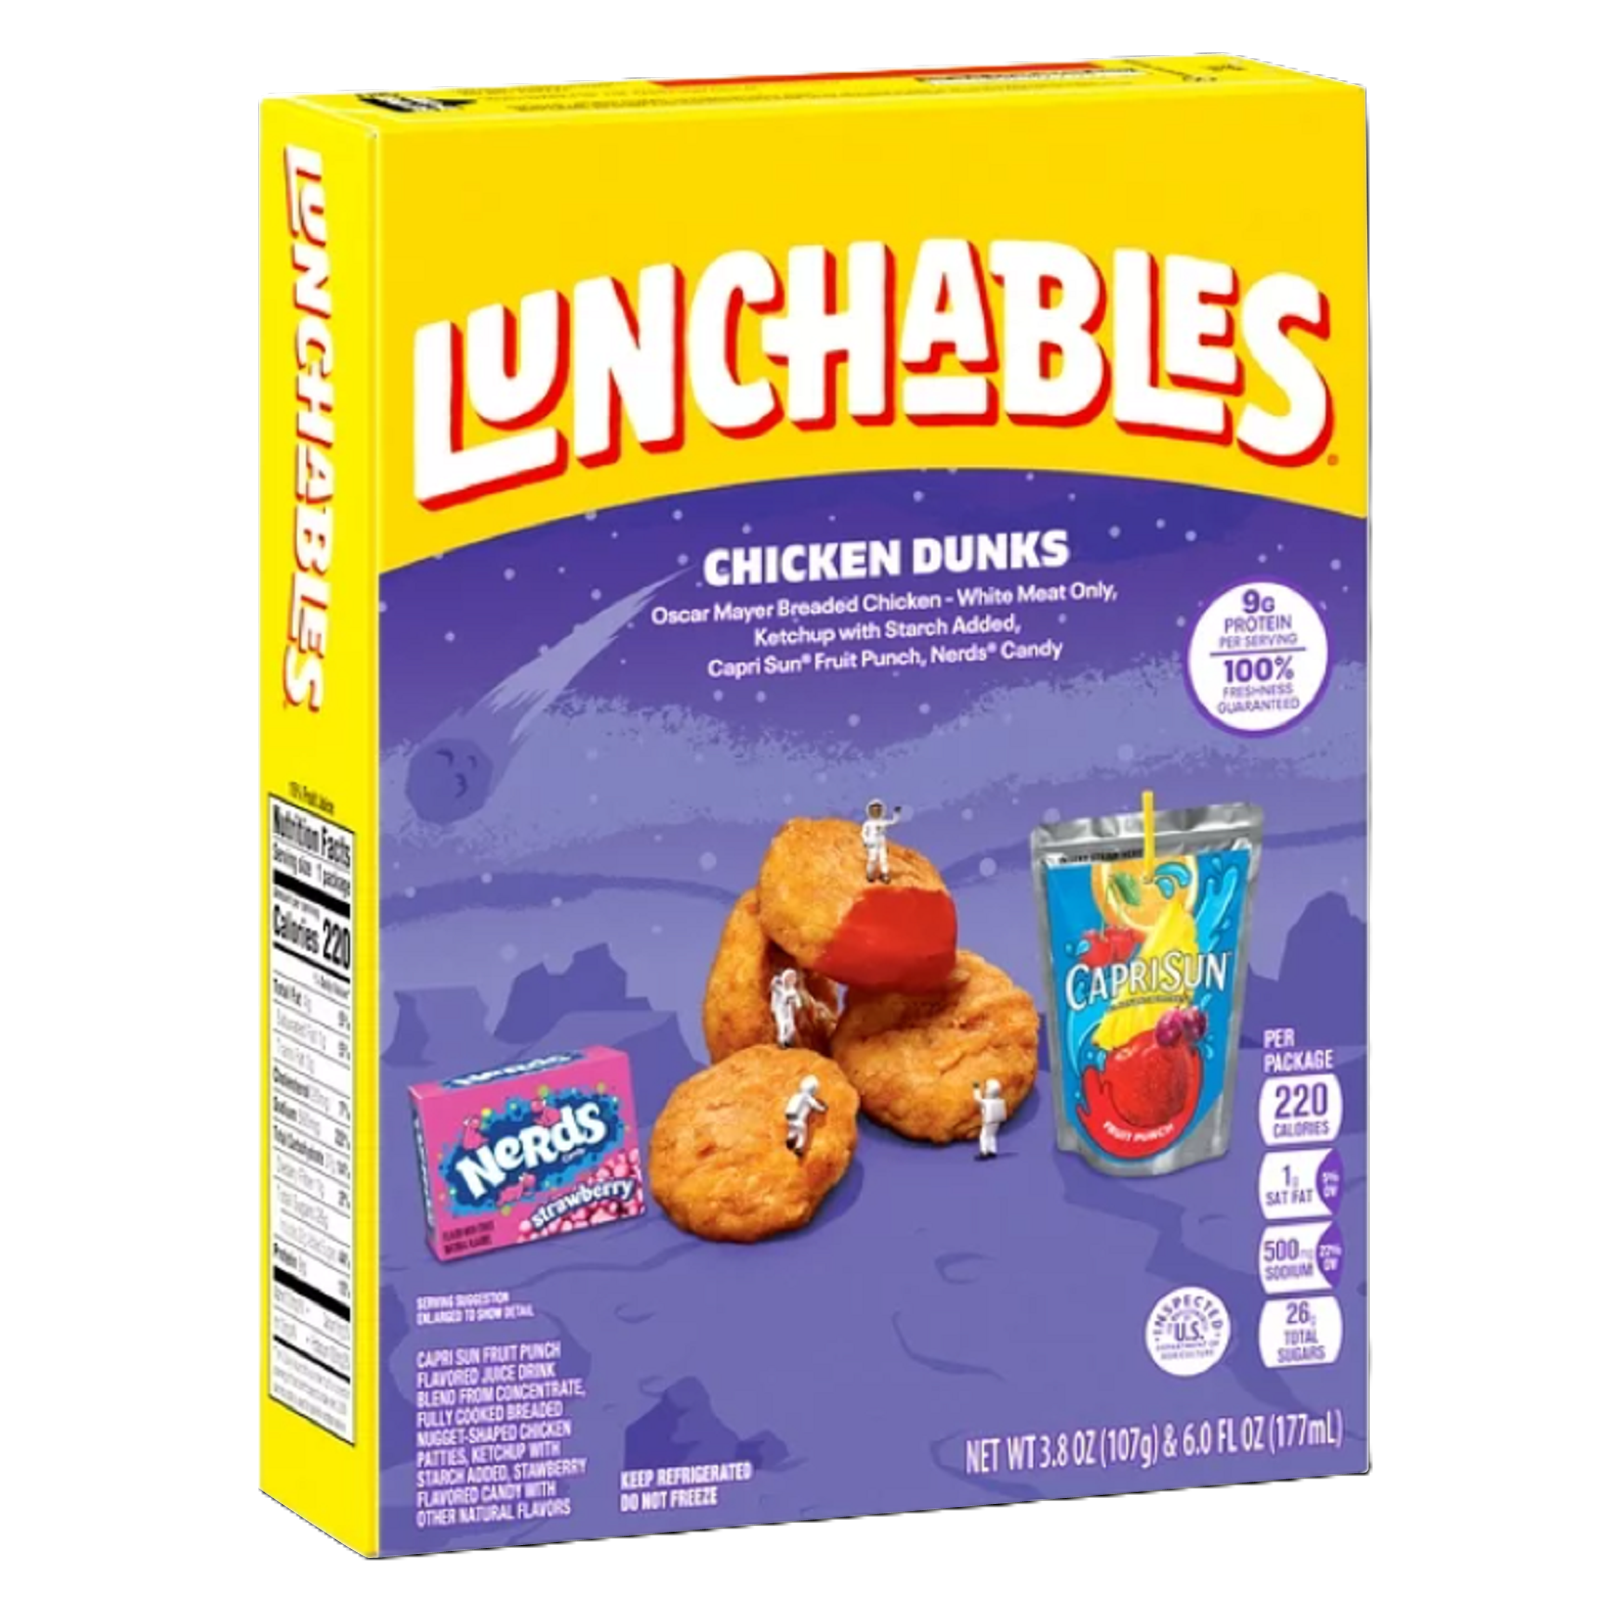 Lunchables Chicken Dunks Meal Kit with Caprisun - 9.8oz